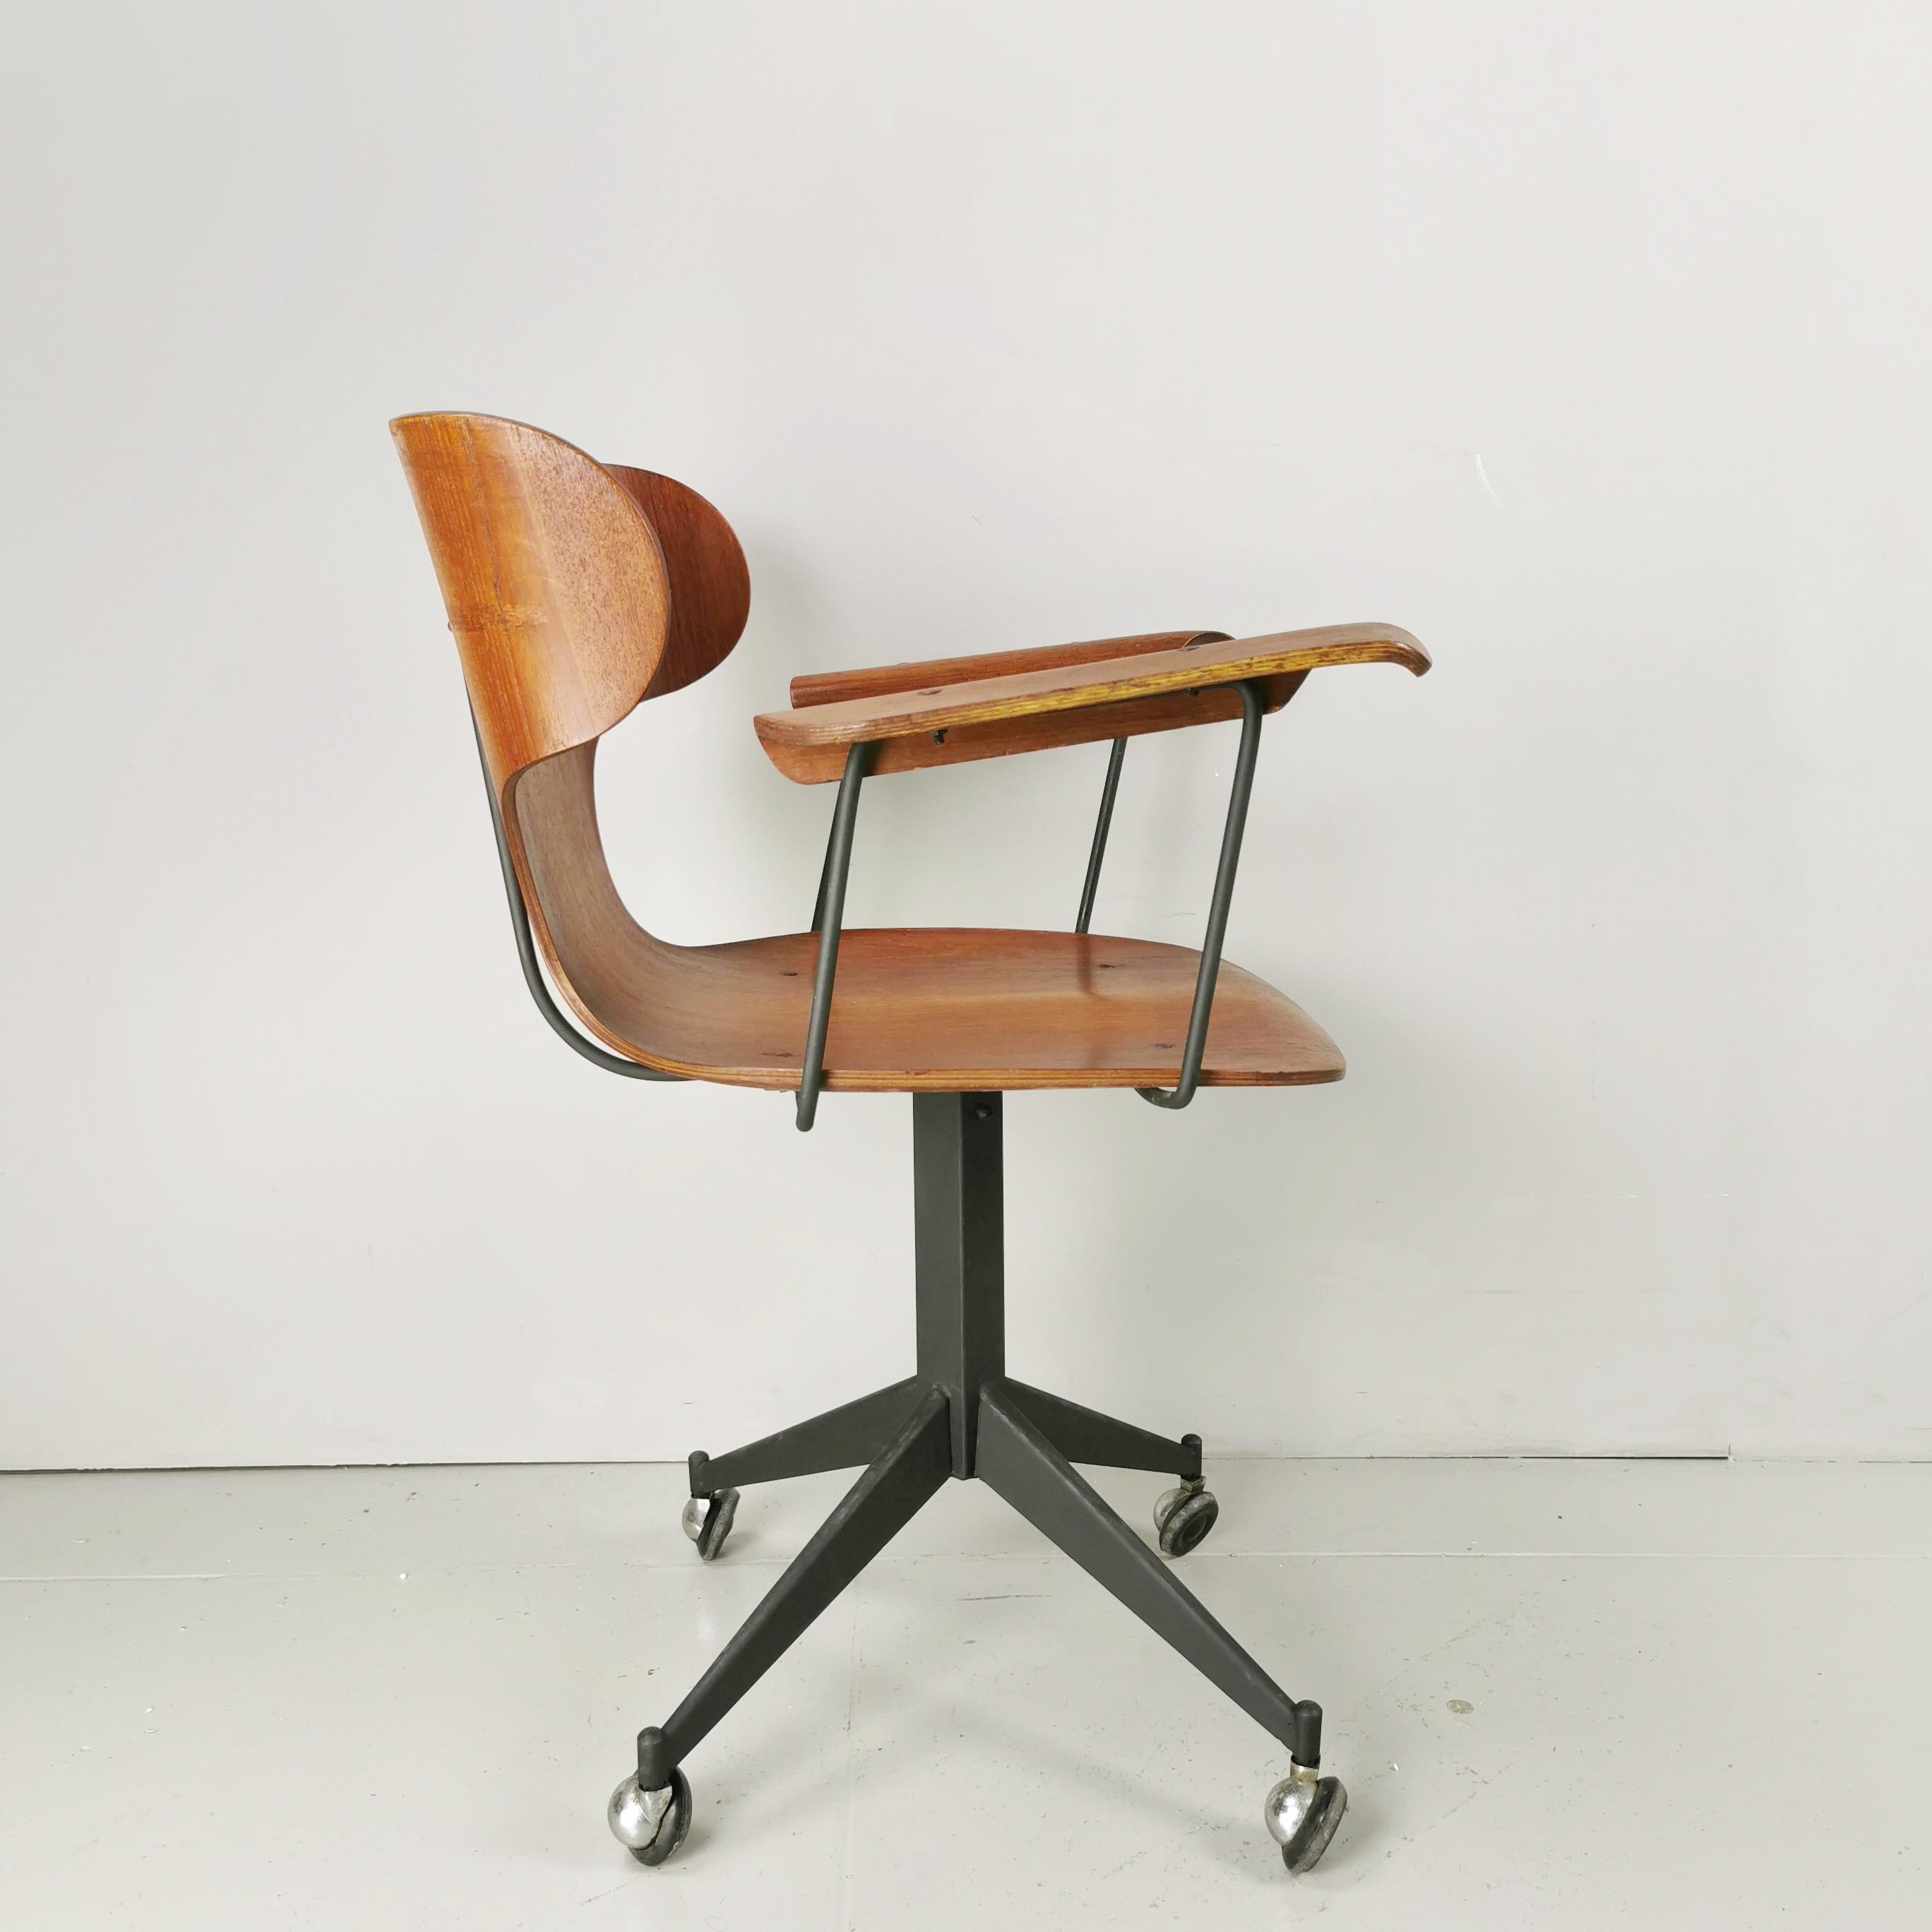 Italian rare 50s/60s curved wooden office chair en vente